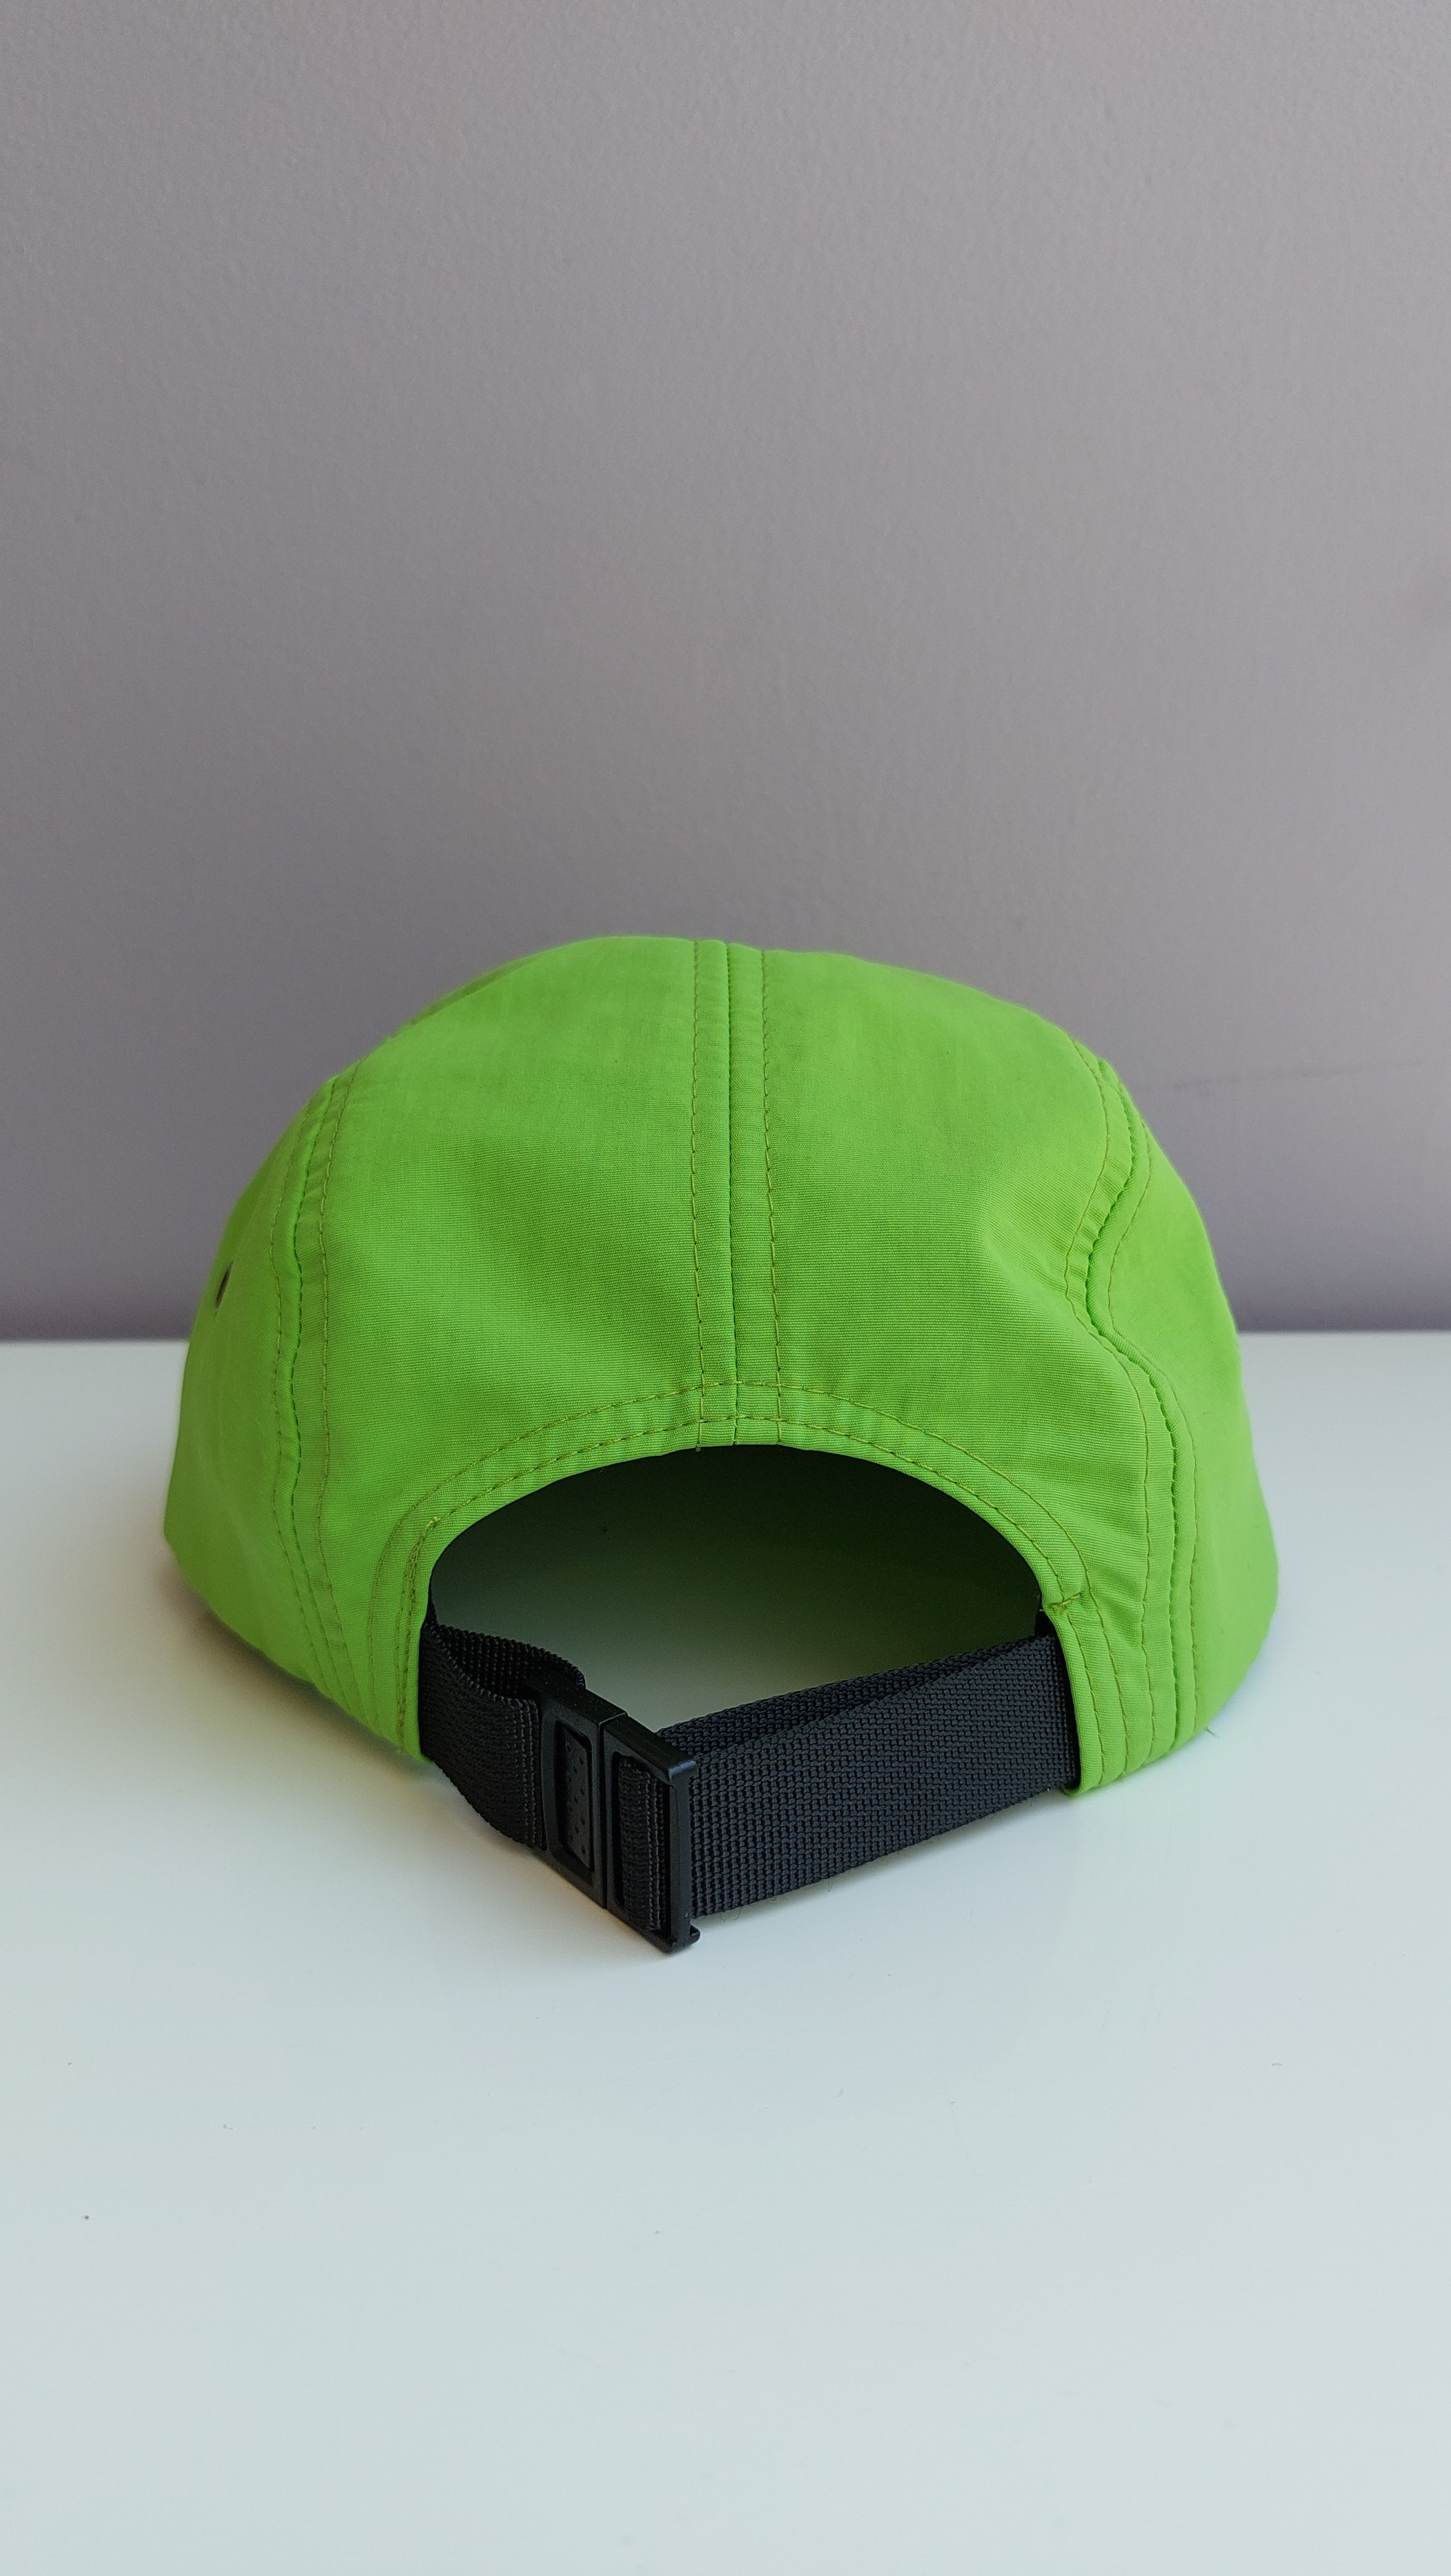 A back view of a bright green 5 panel cap with a black adjustable strap sitting on a white surface with a light purple background.